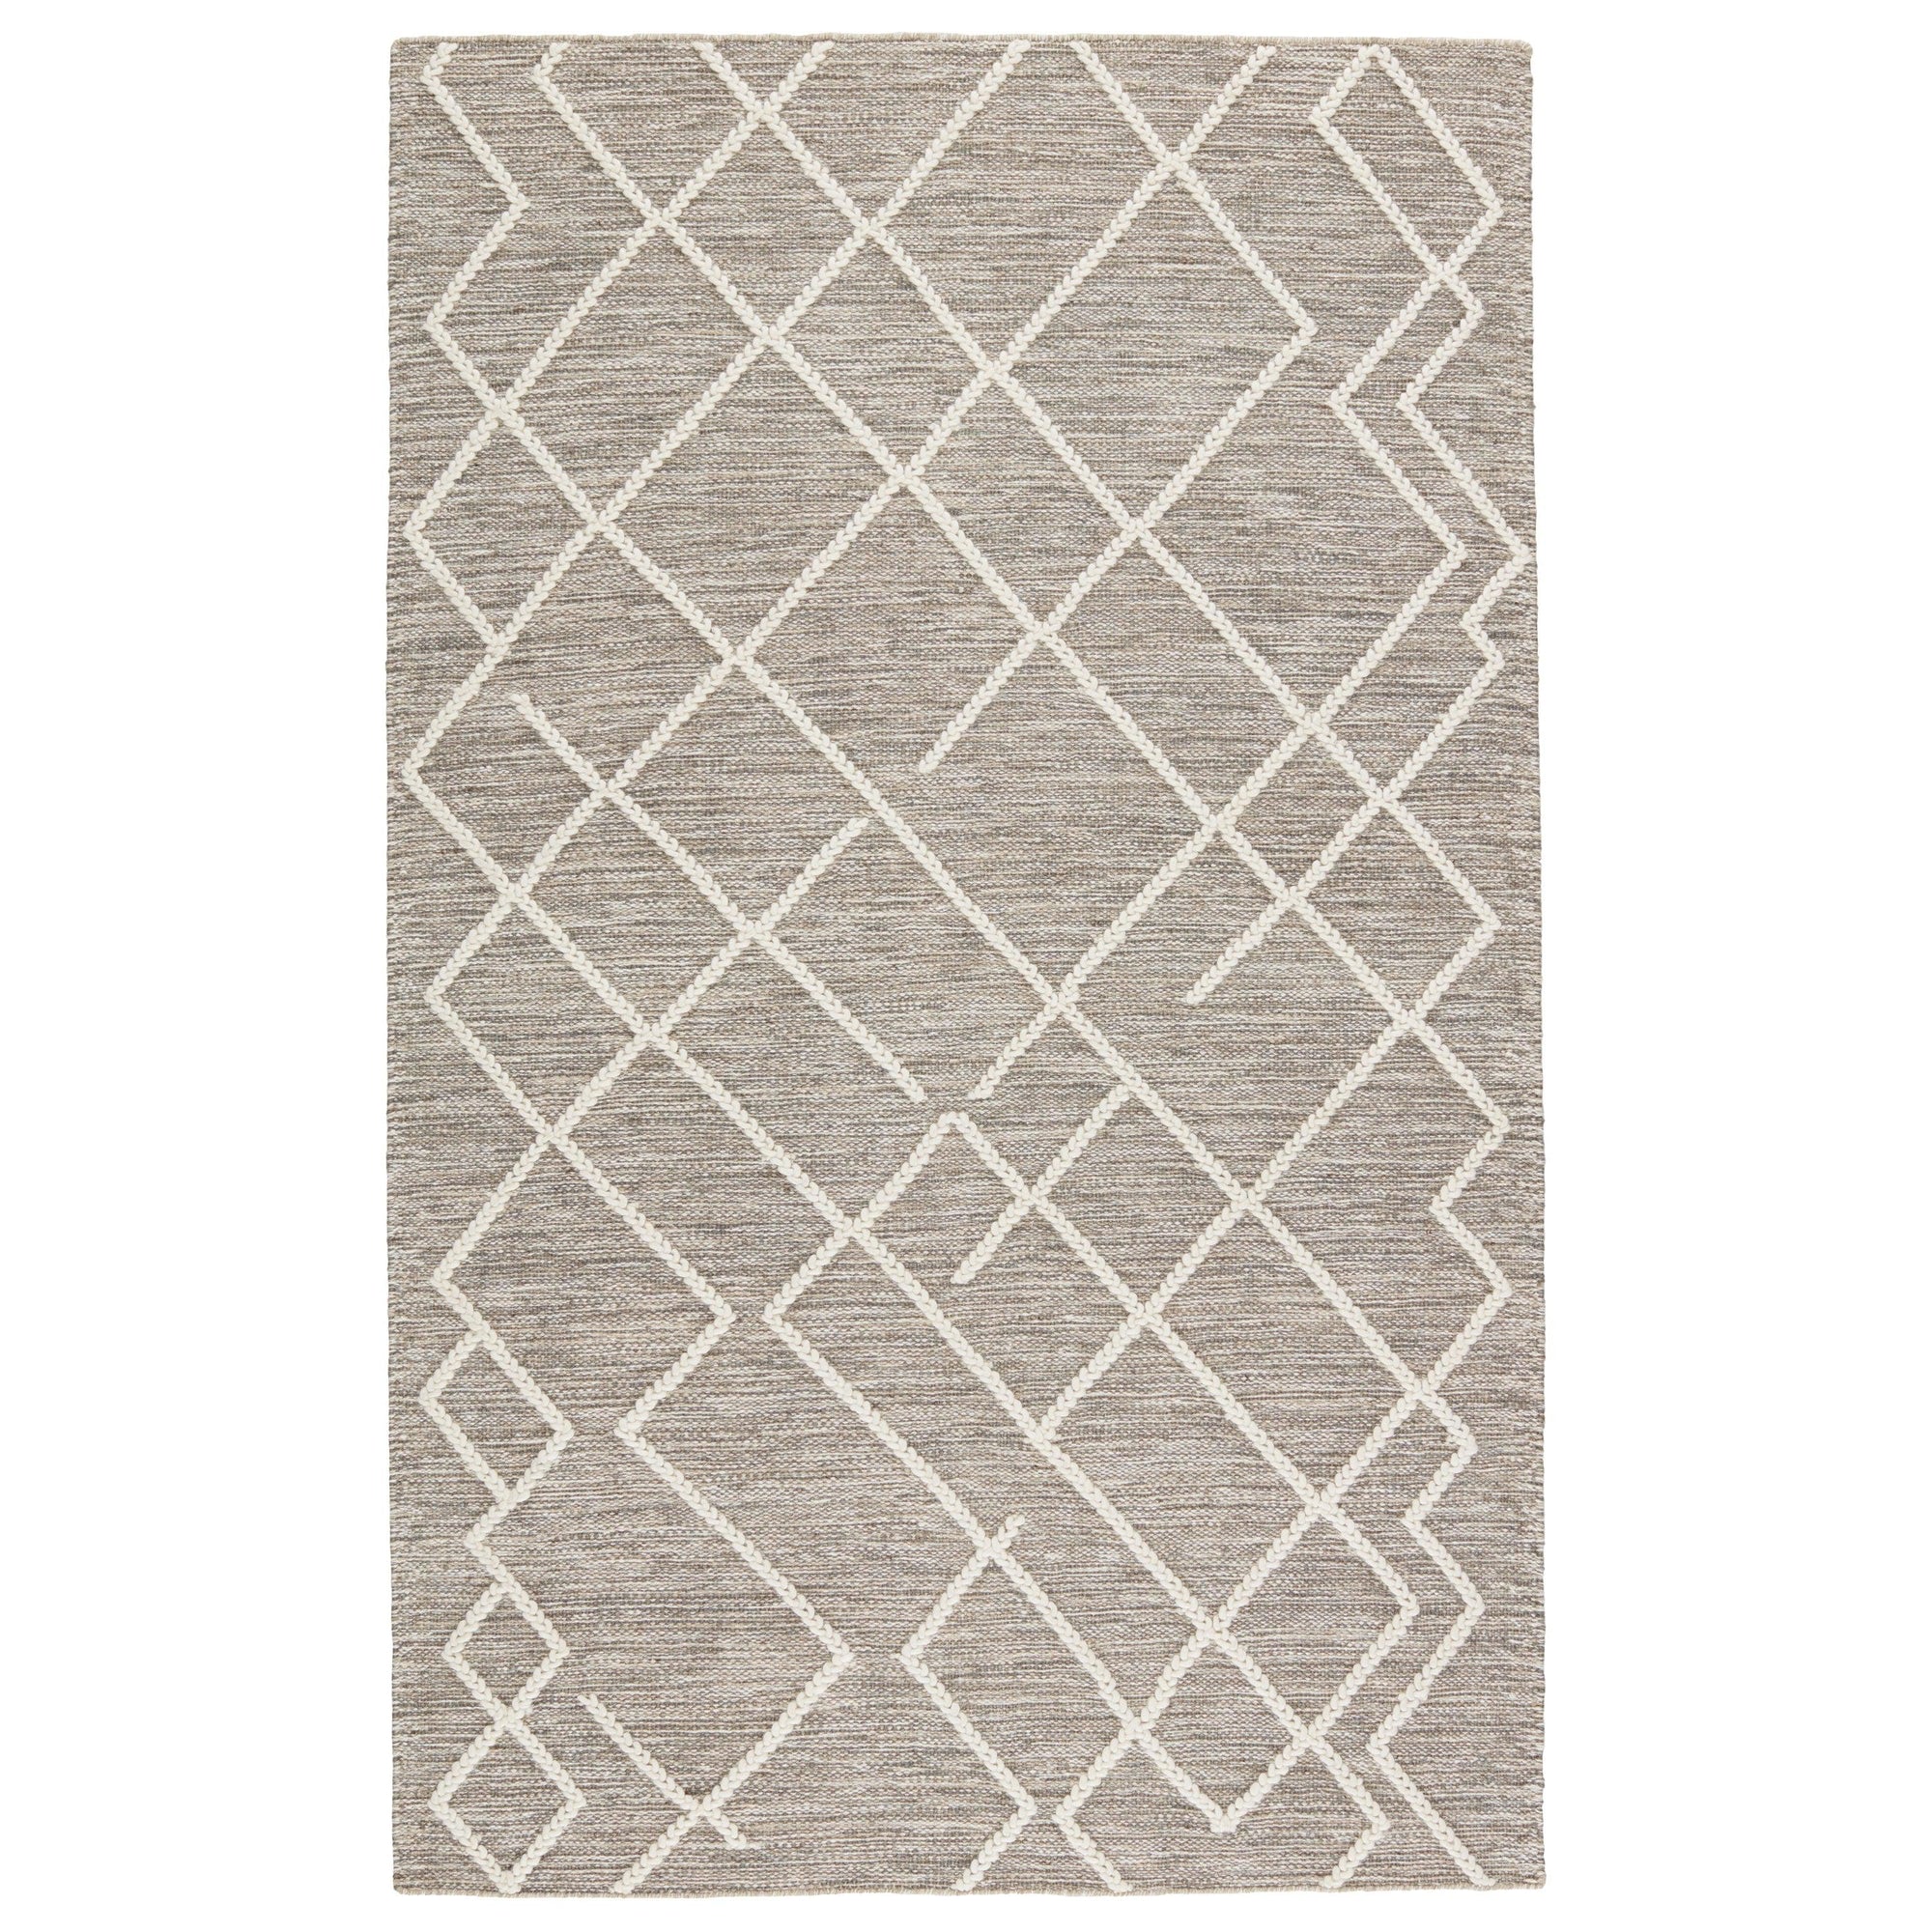 Rugs by Roo | Jaipur Living Moab Natural Geometric Gray Ivory Area Rug-RUG149570